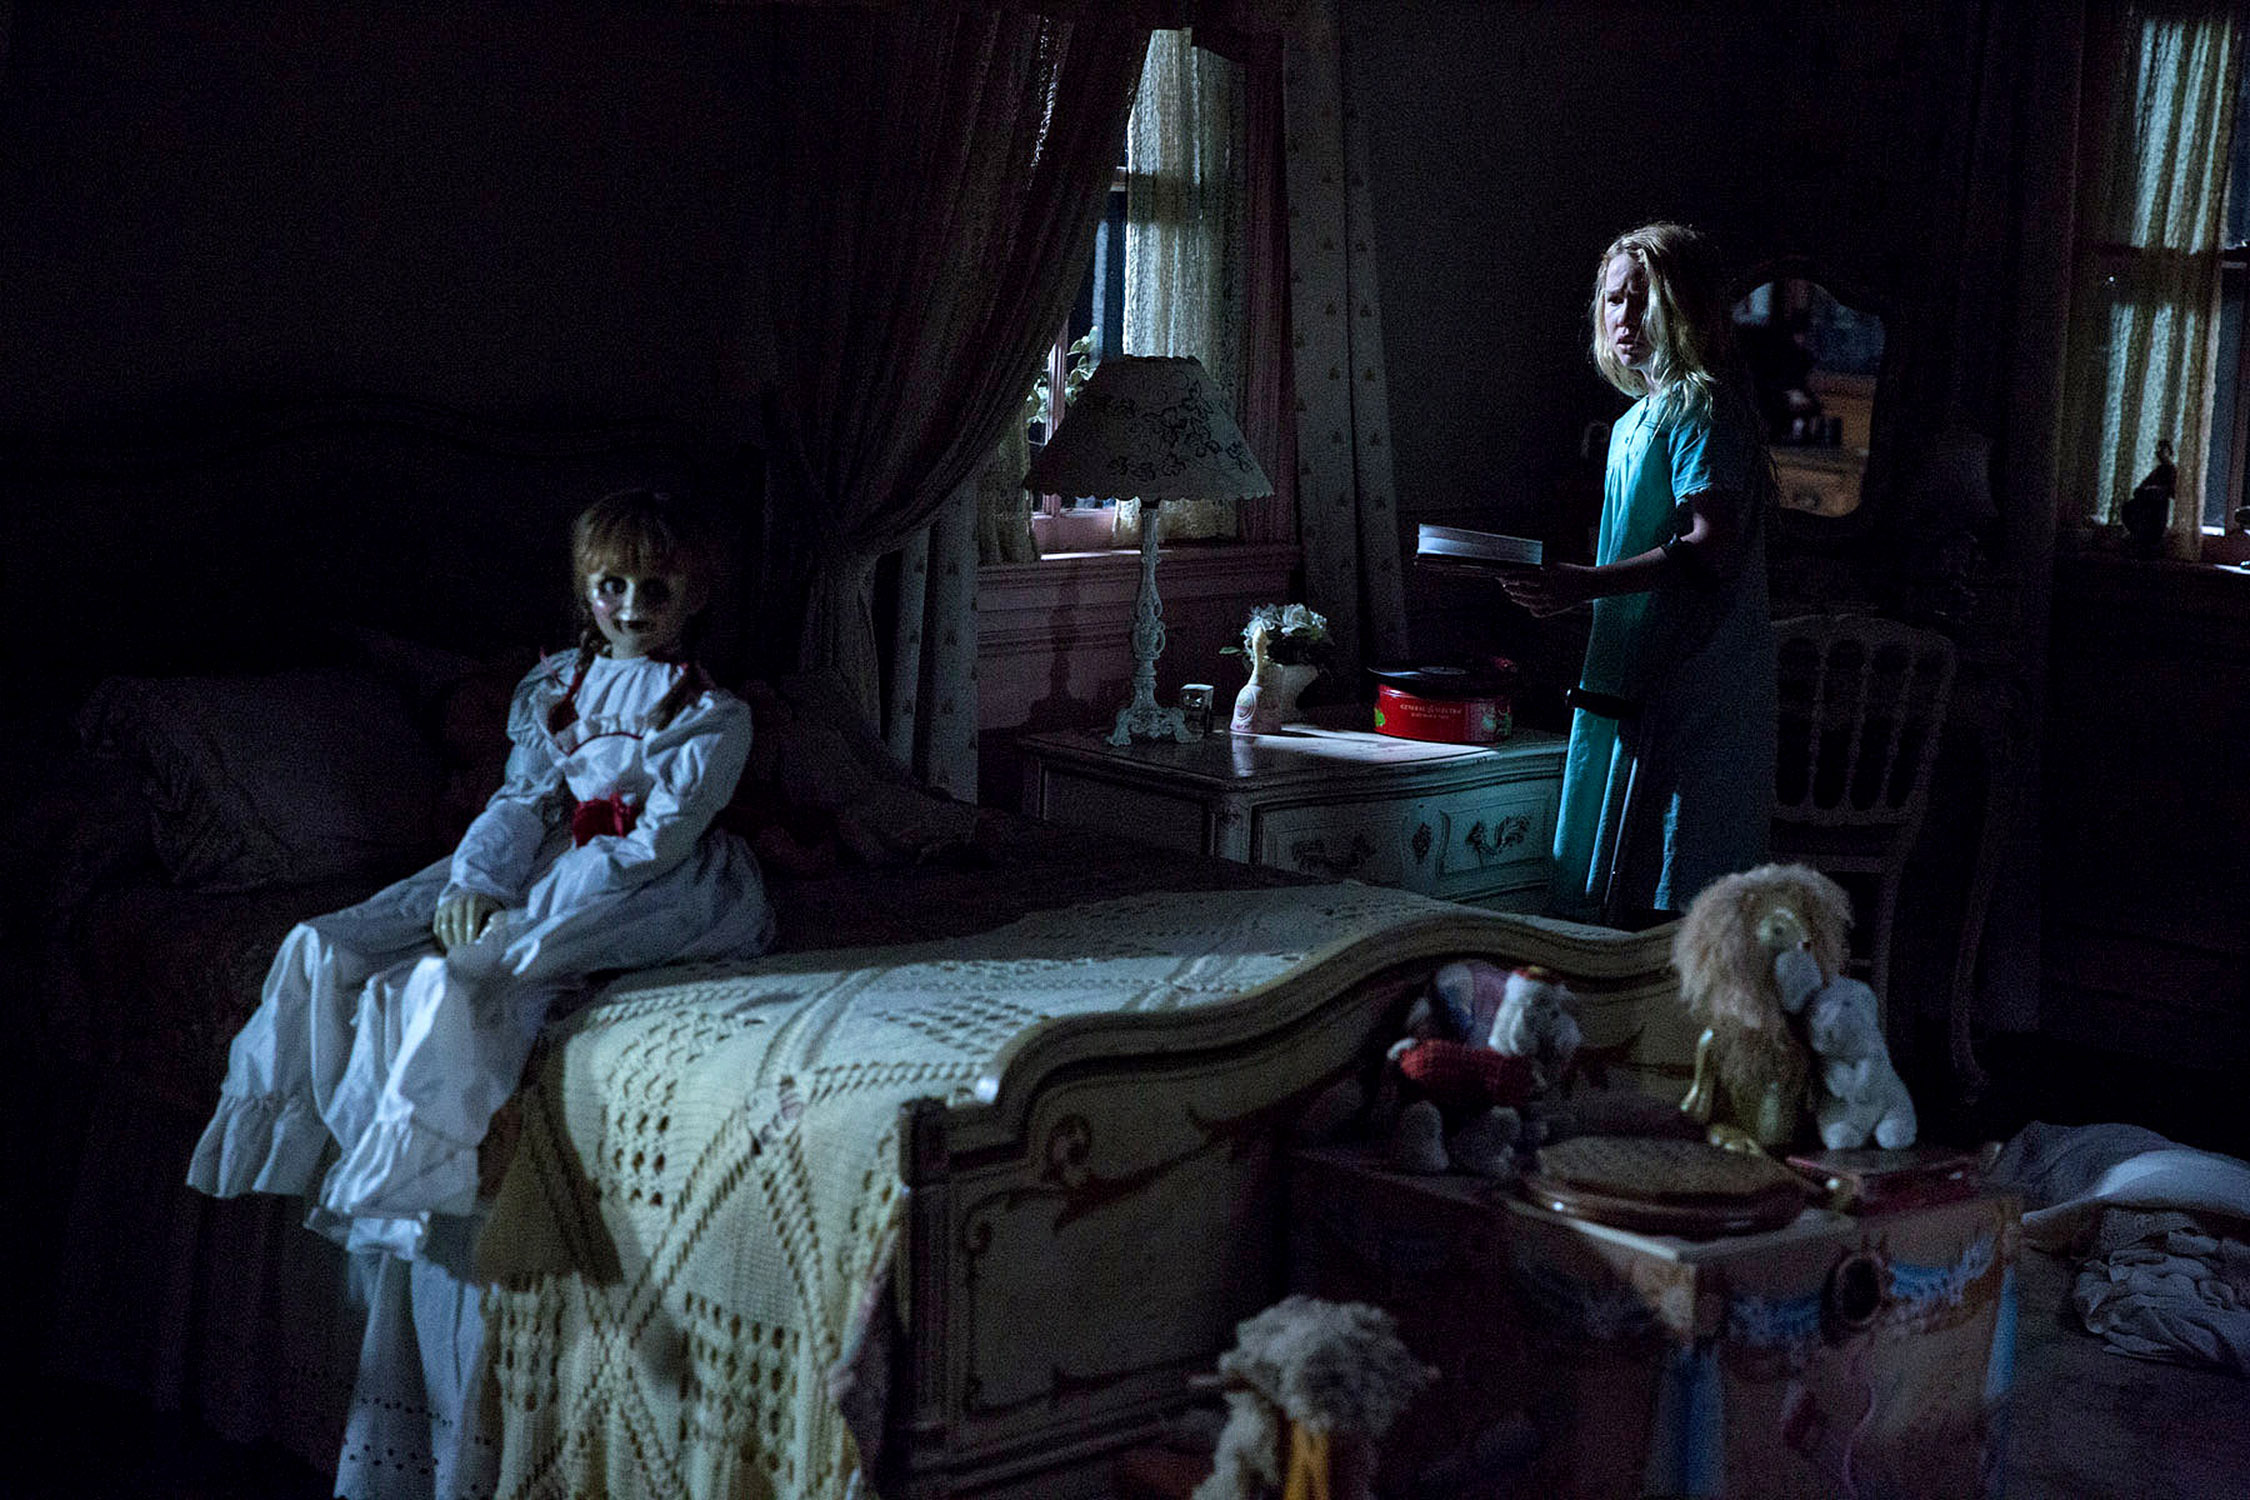 (L-R) The Annabelle doll and TALITHA BATEMAN as Janice in New Line Cinema’s supernatural thriller ANNABELLE 2, a Warner Bros. Pictures release.